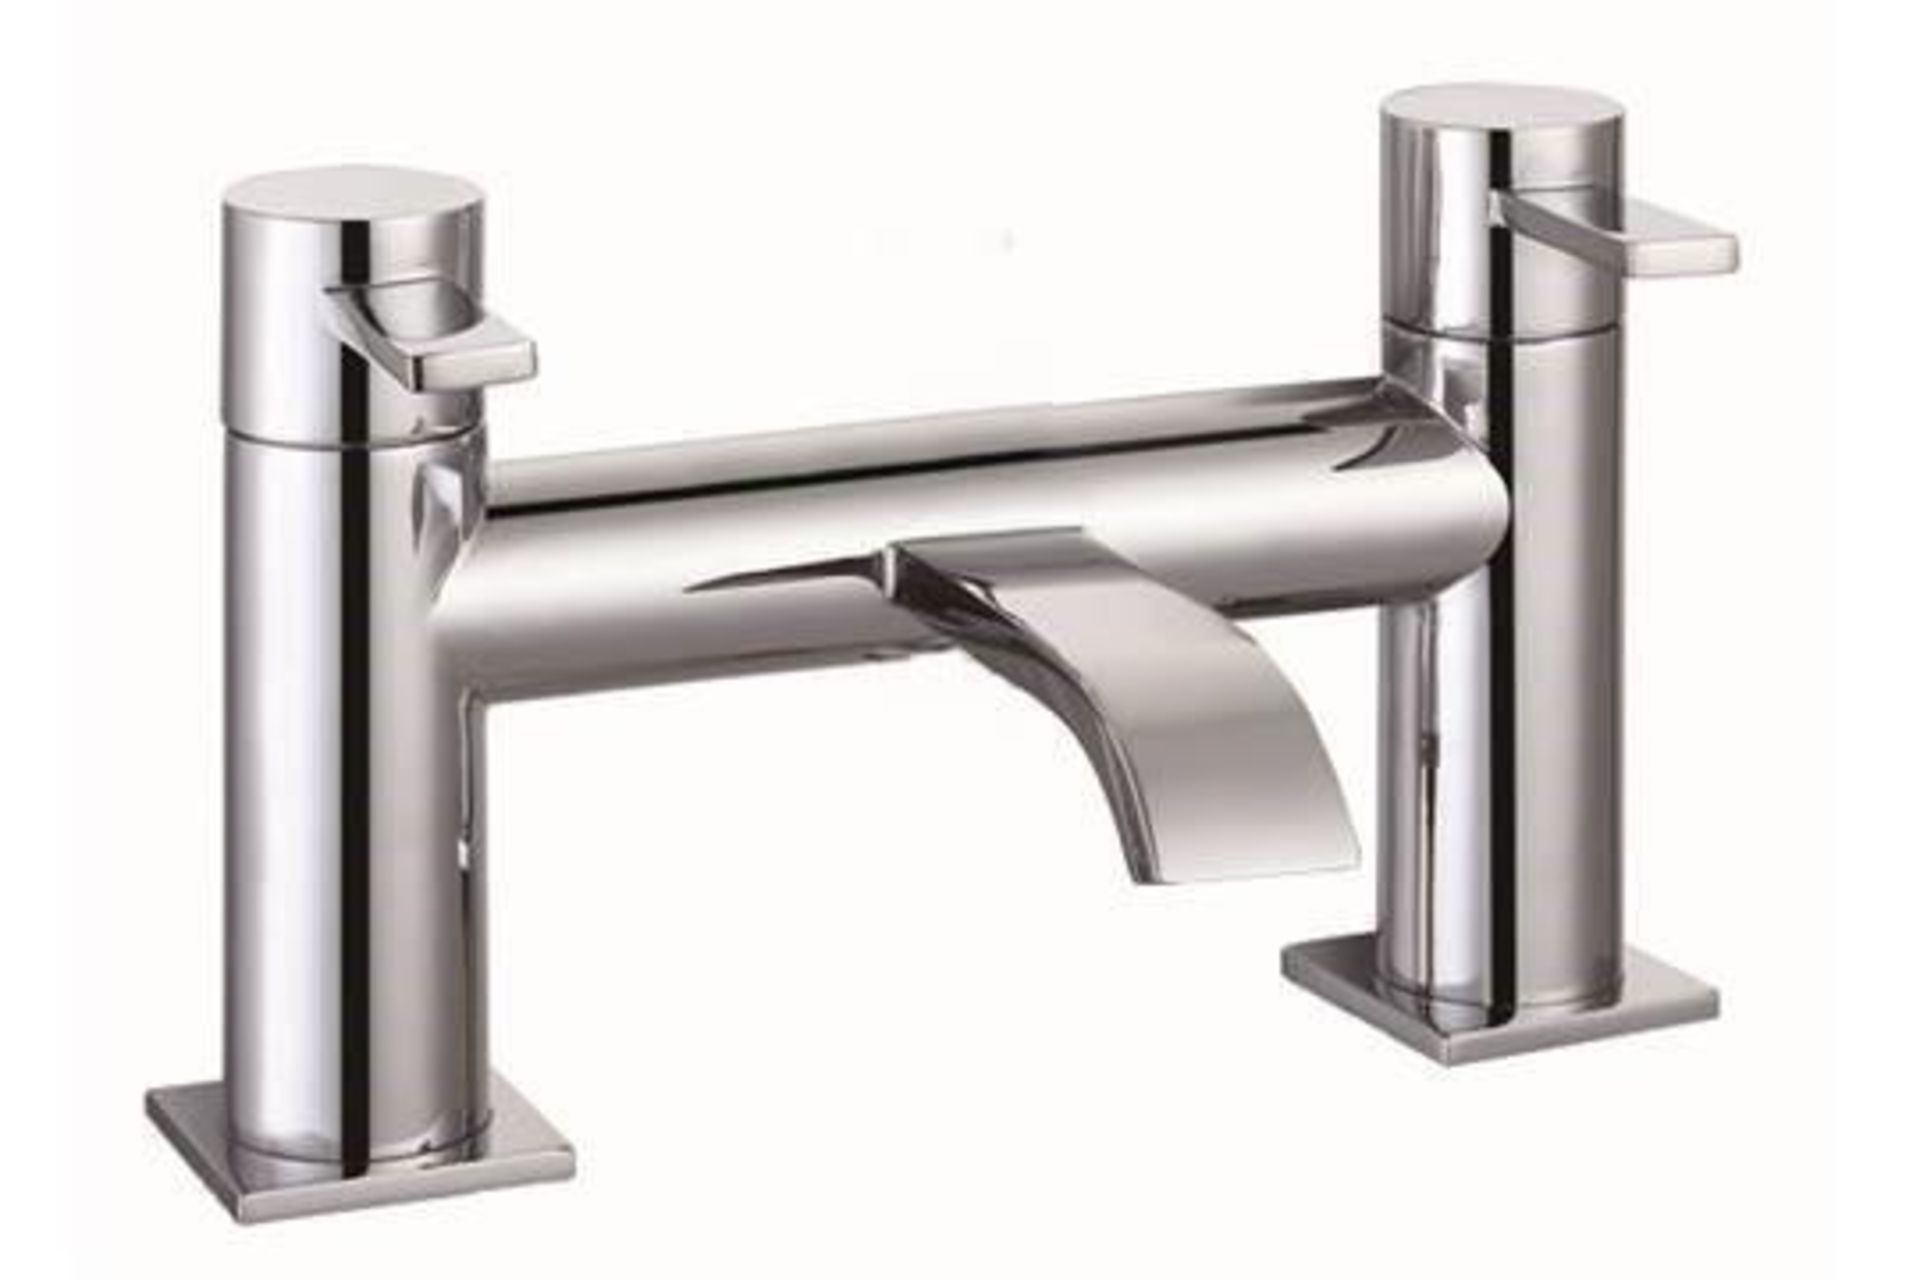 1 x Vogue Series 2 Bath Filler Taps in Chrome - Approx RRP £275!